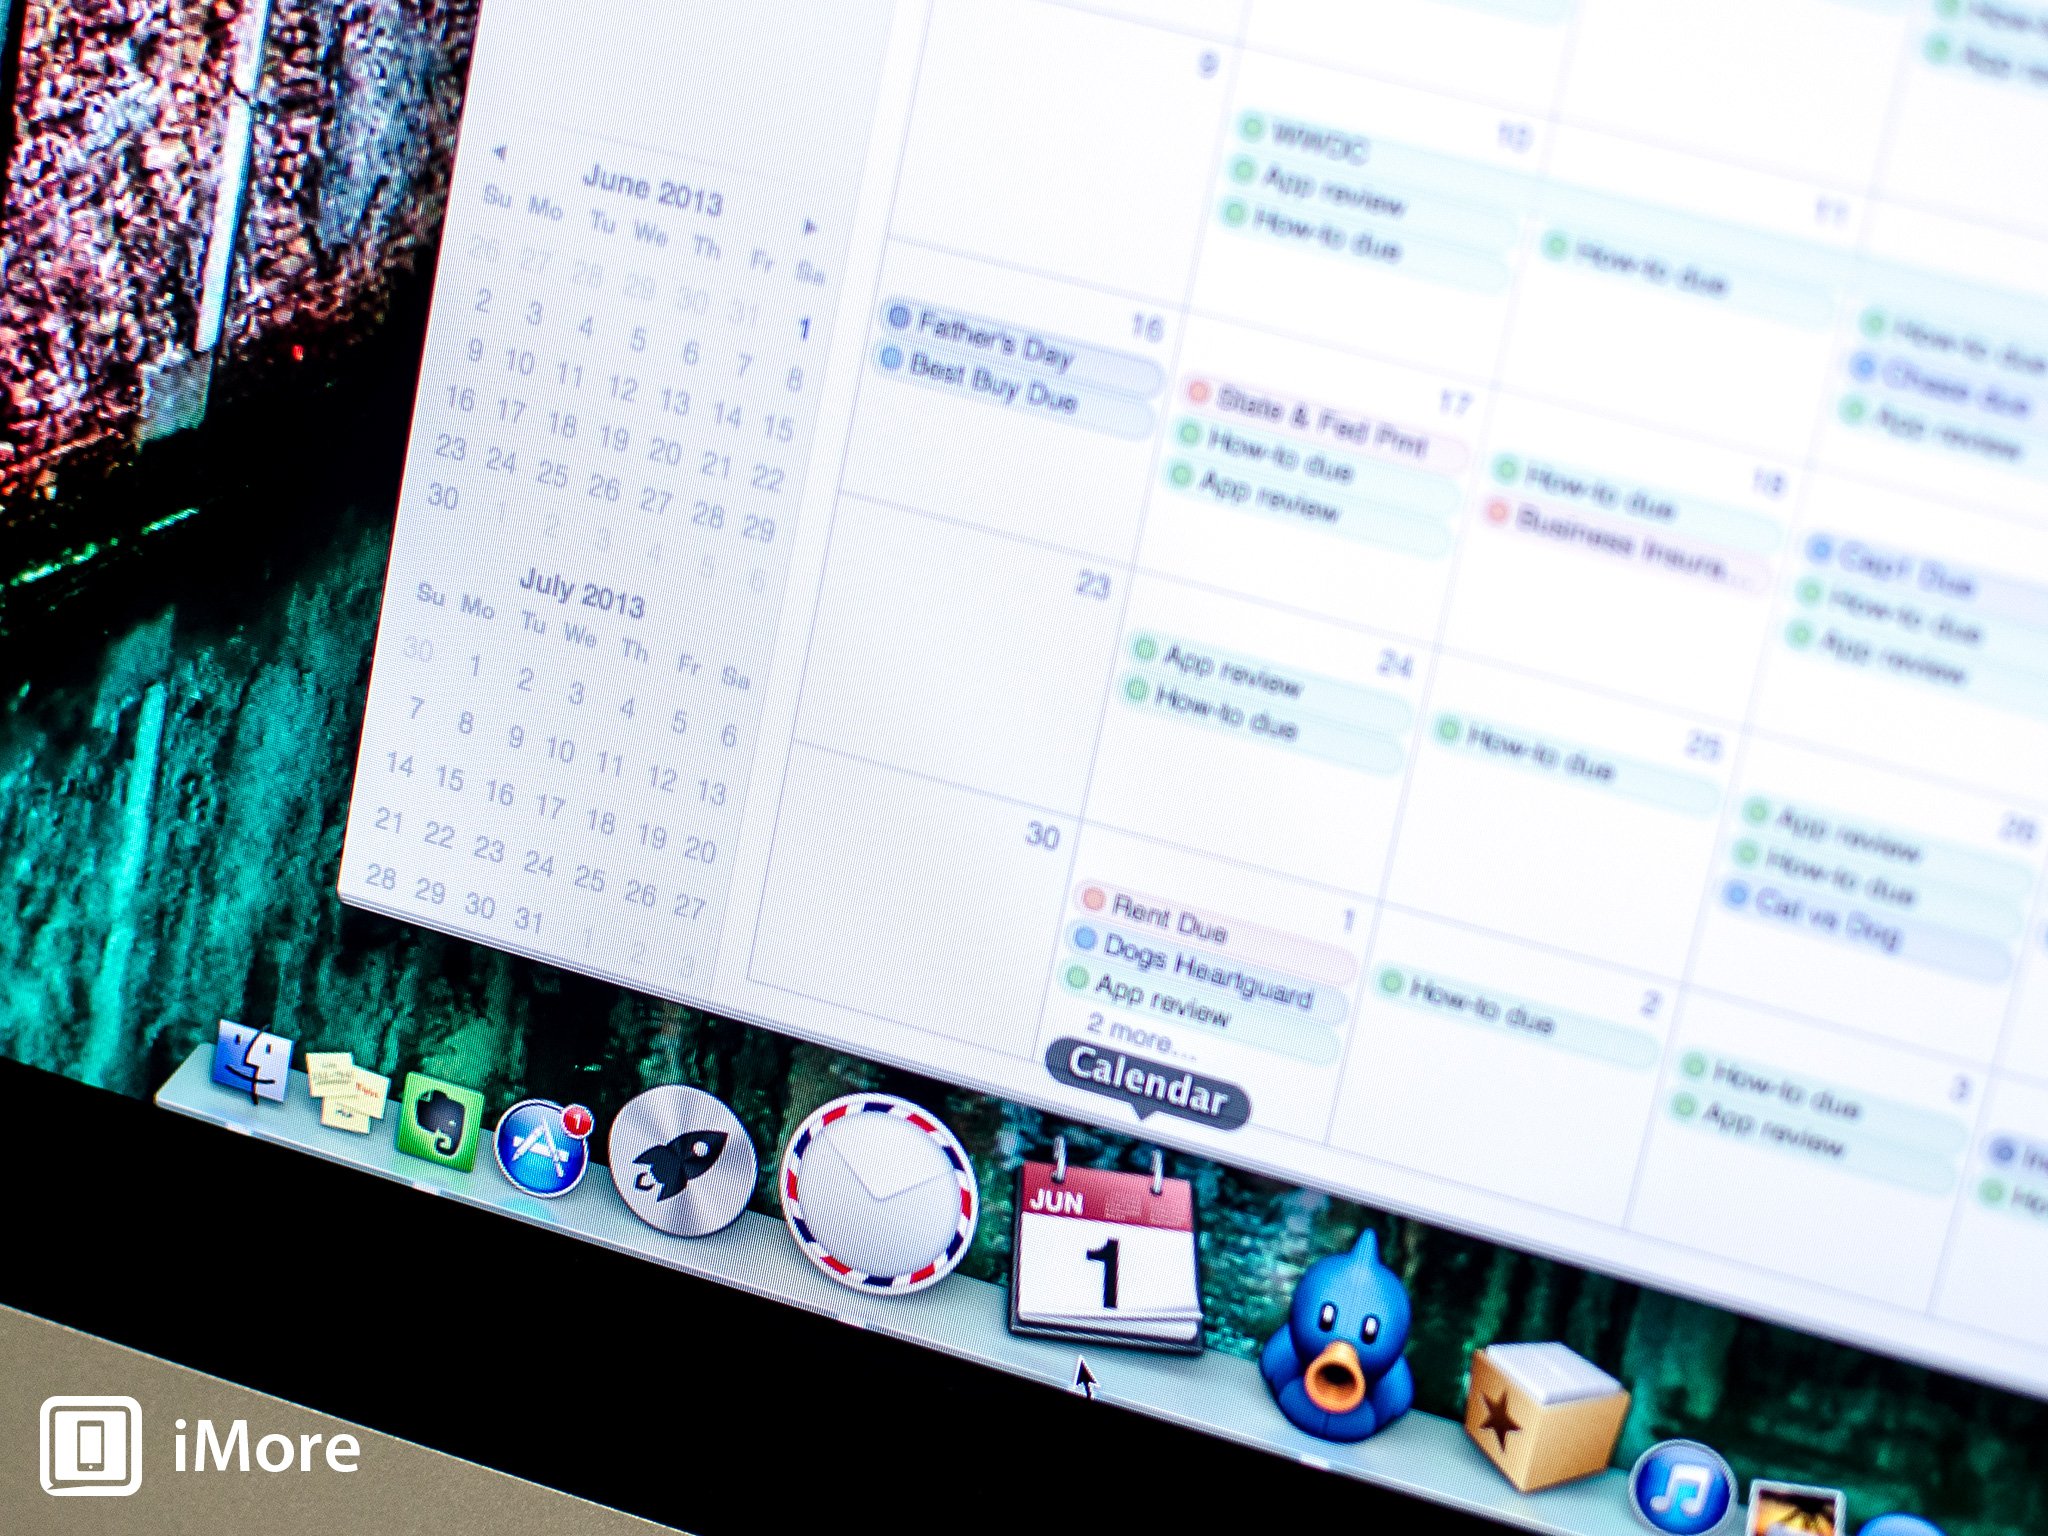 How to view mini calendars in the Calendars app for Mac